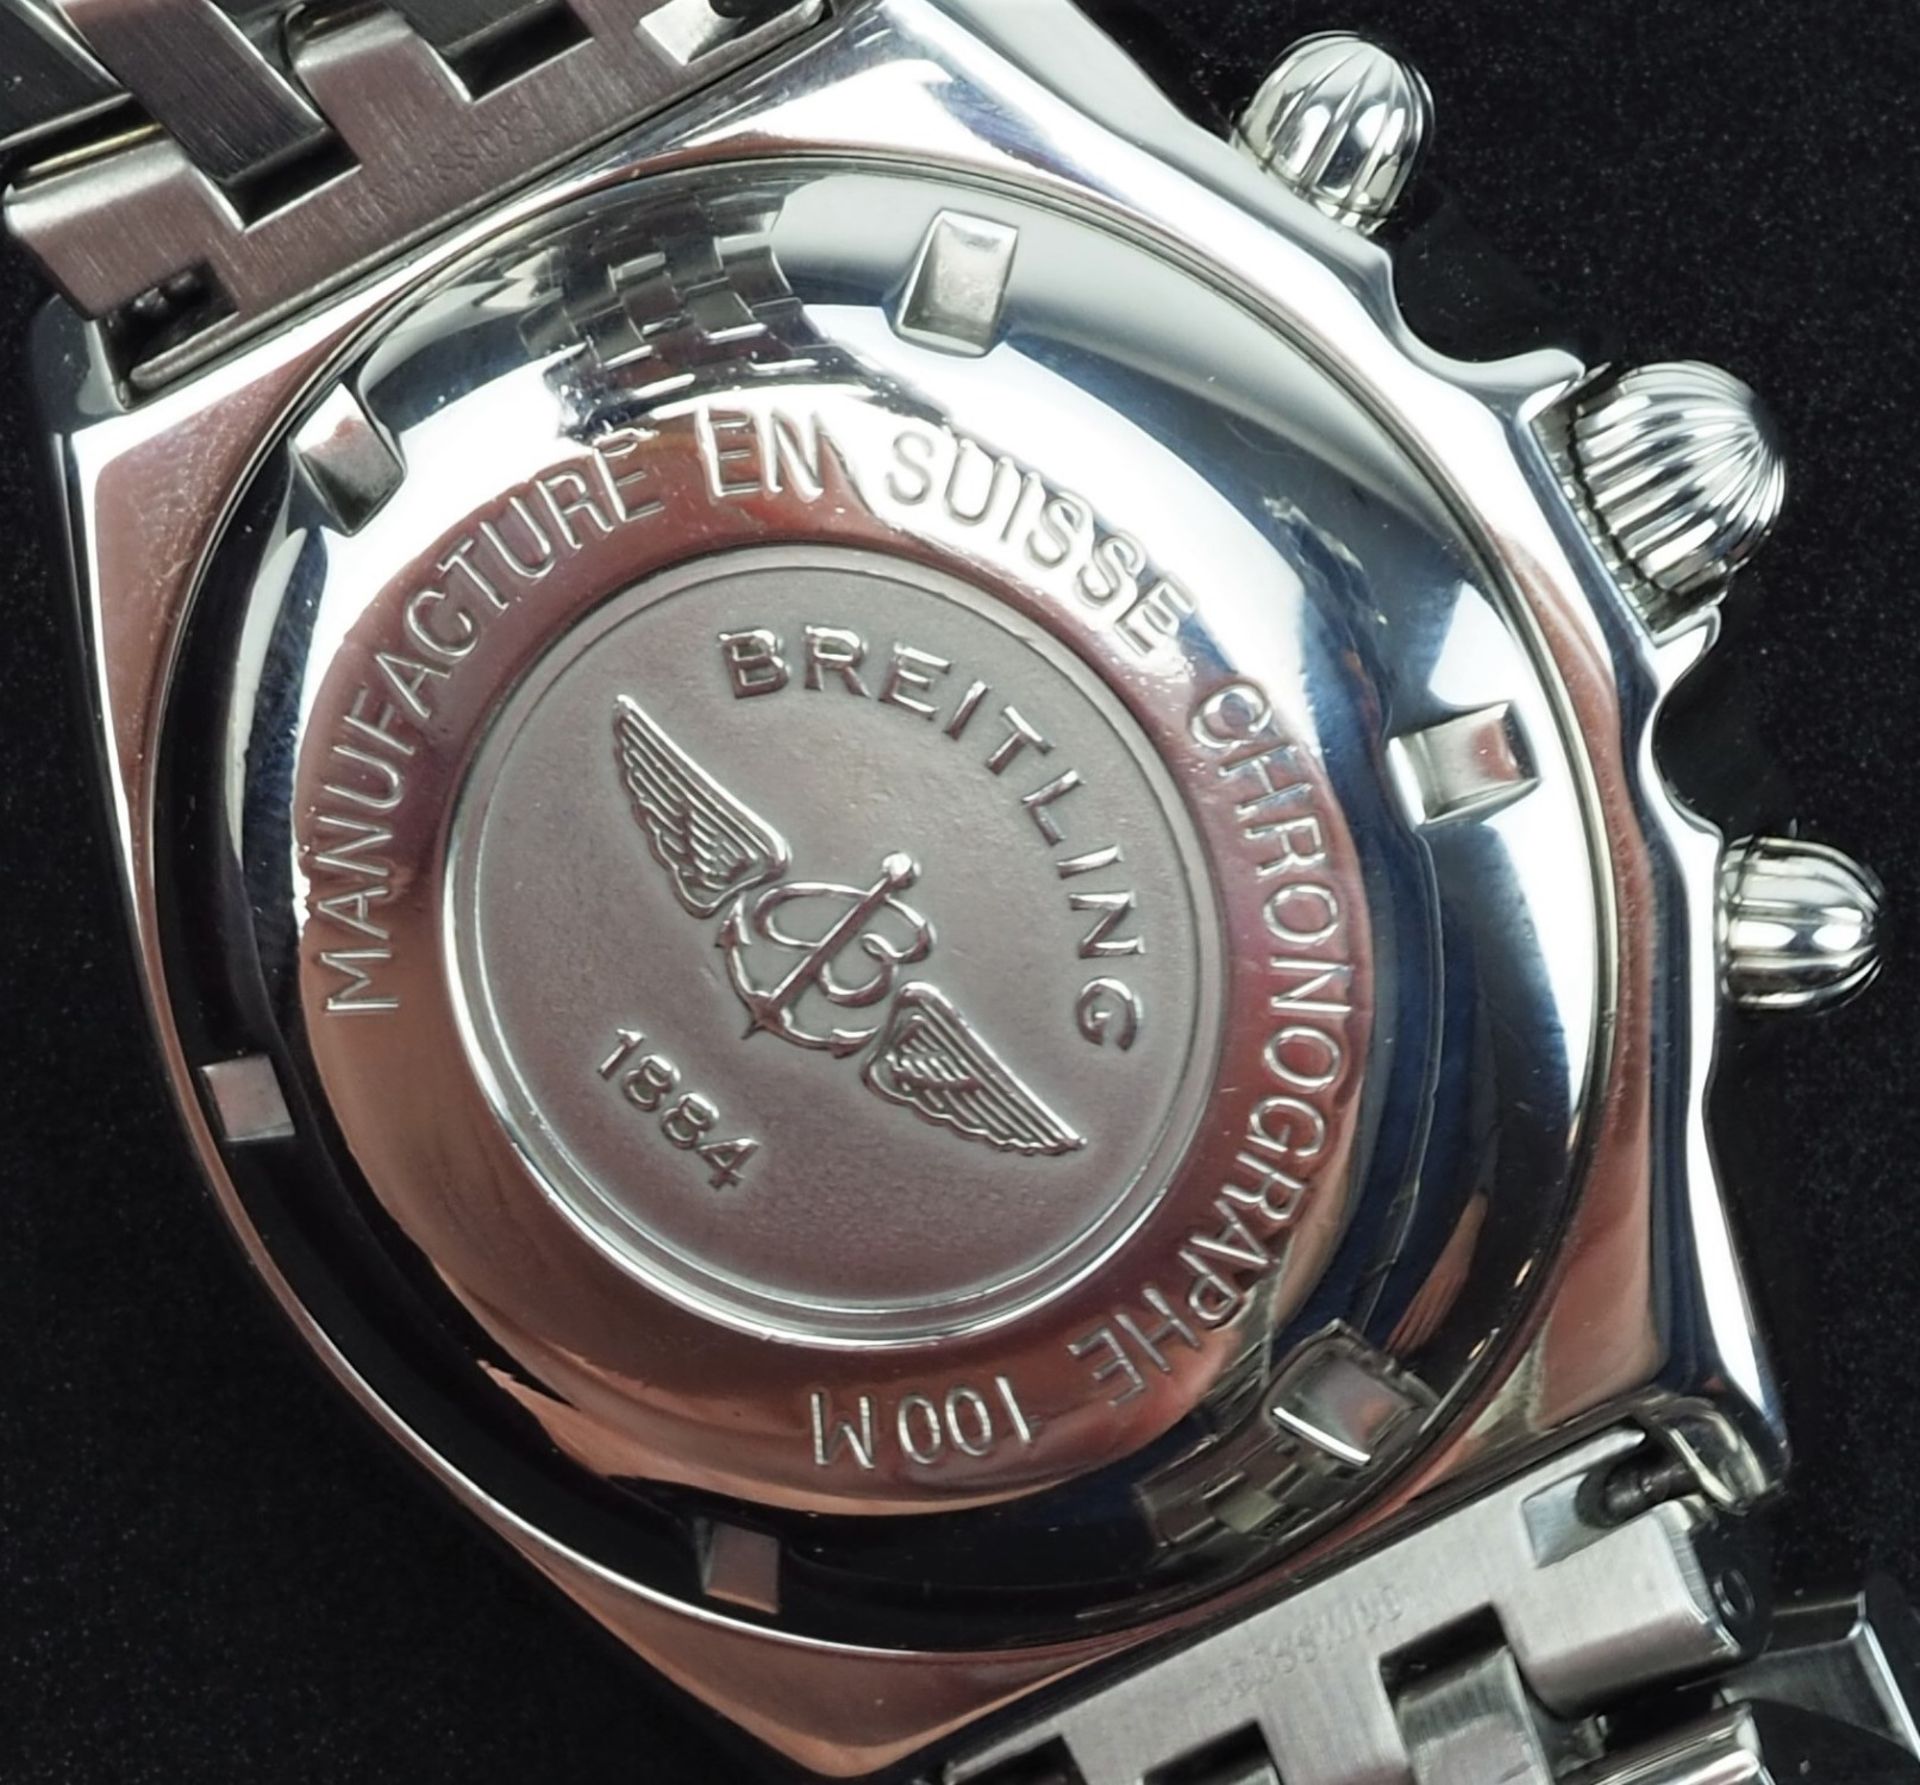 Breitling Crosswind Racing Automatic, Ref. A13055 - Image 3 of 5